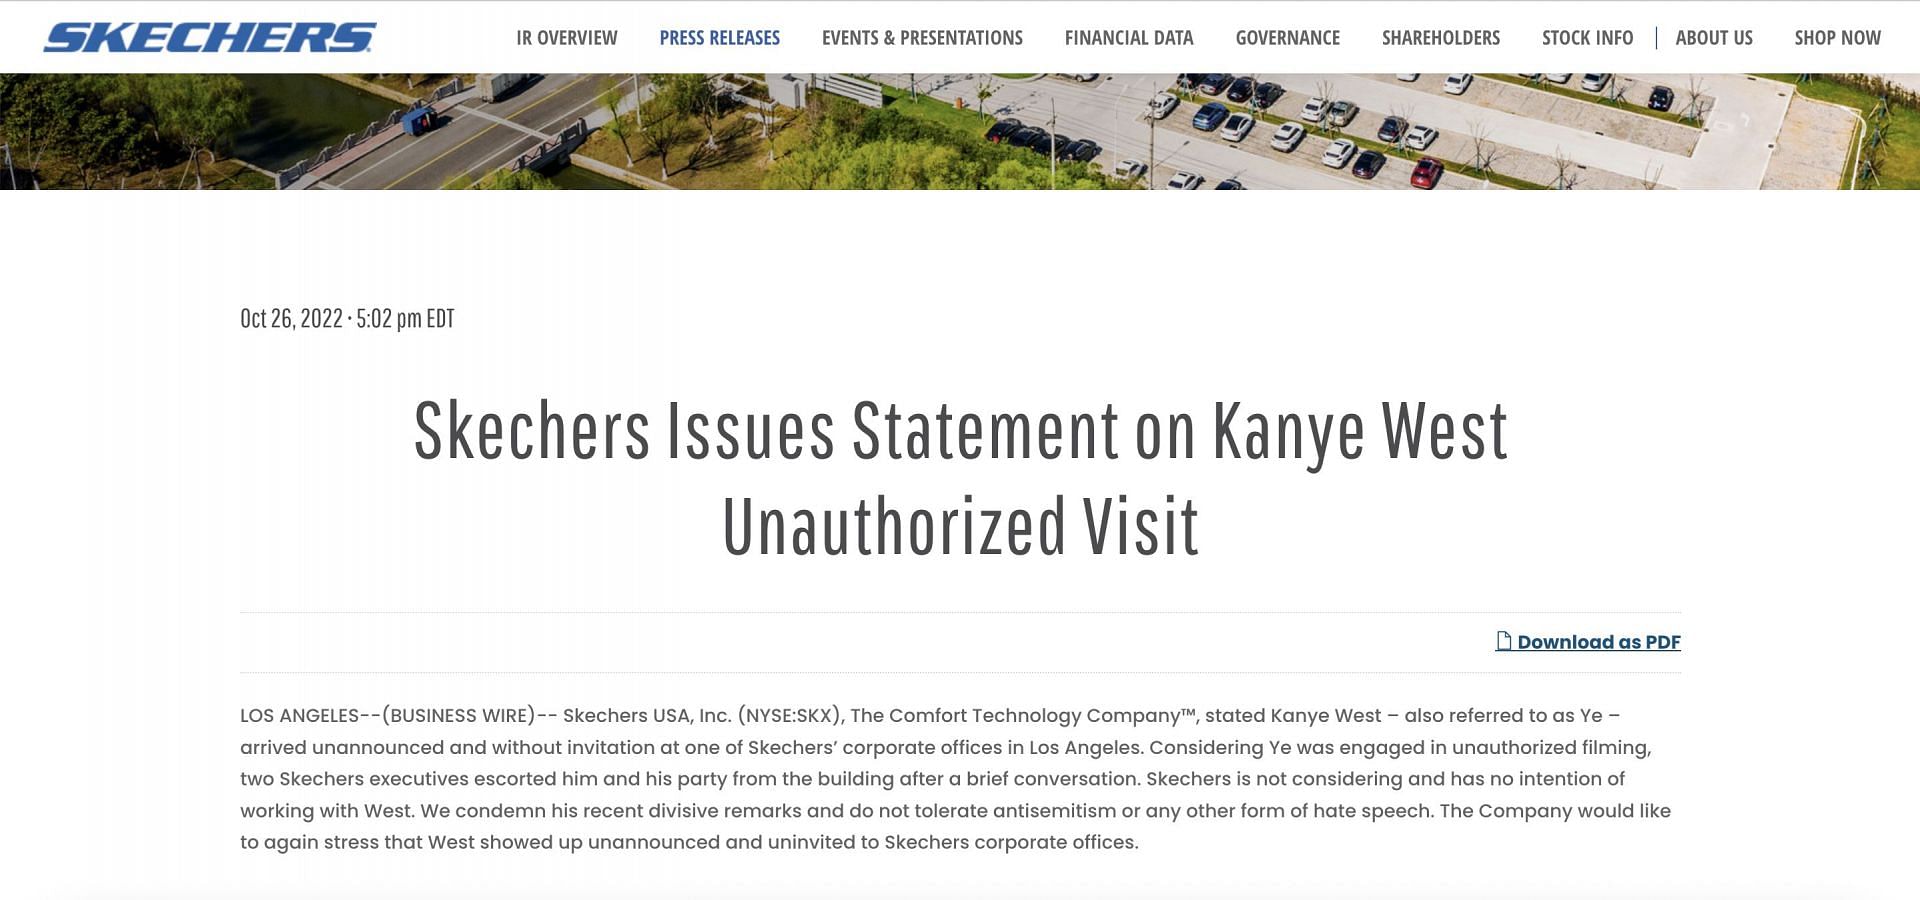 Skechers issued an official statement clarifying that Kanye walked in unannounced, and the brand had no intention of meeting or working with him. (Image via Skechers)